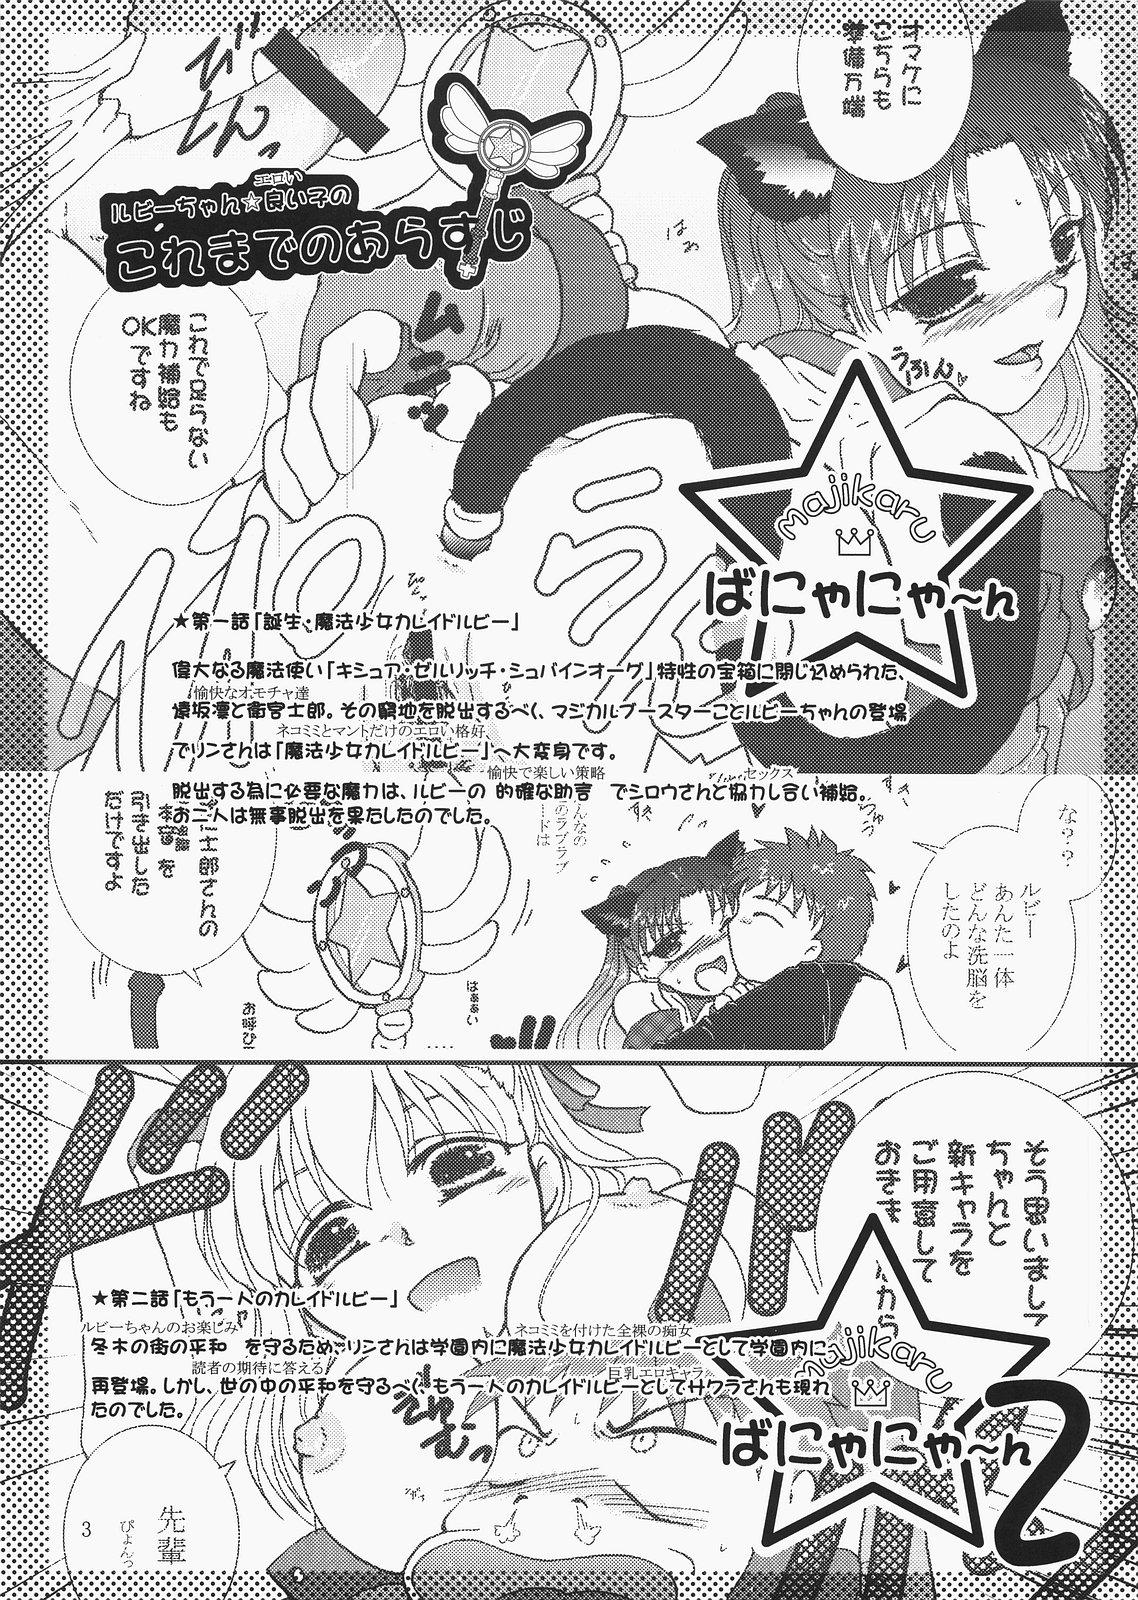 Transex Magical Bunny Nyan 4 - Fate hollow ataraxia Missionary Porn - Page 2